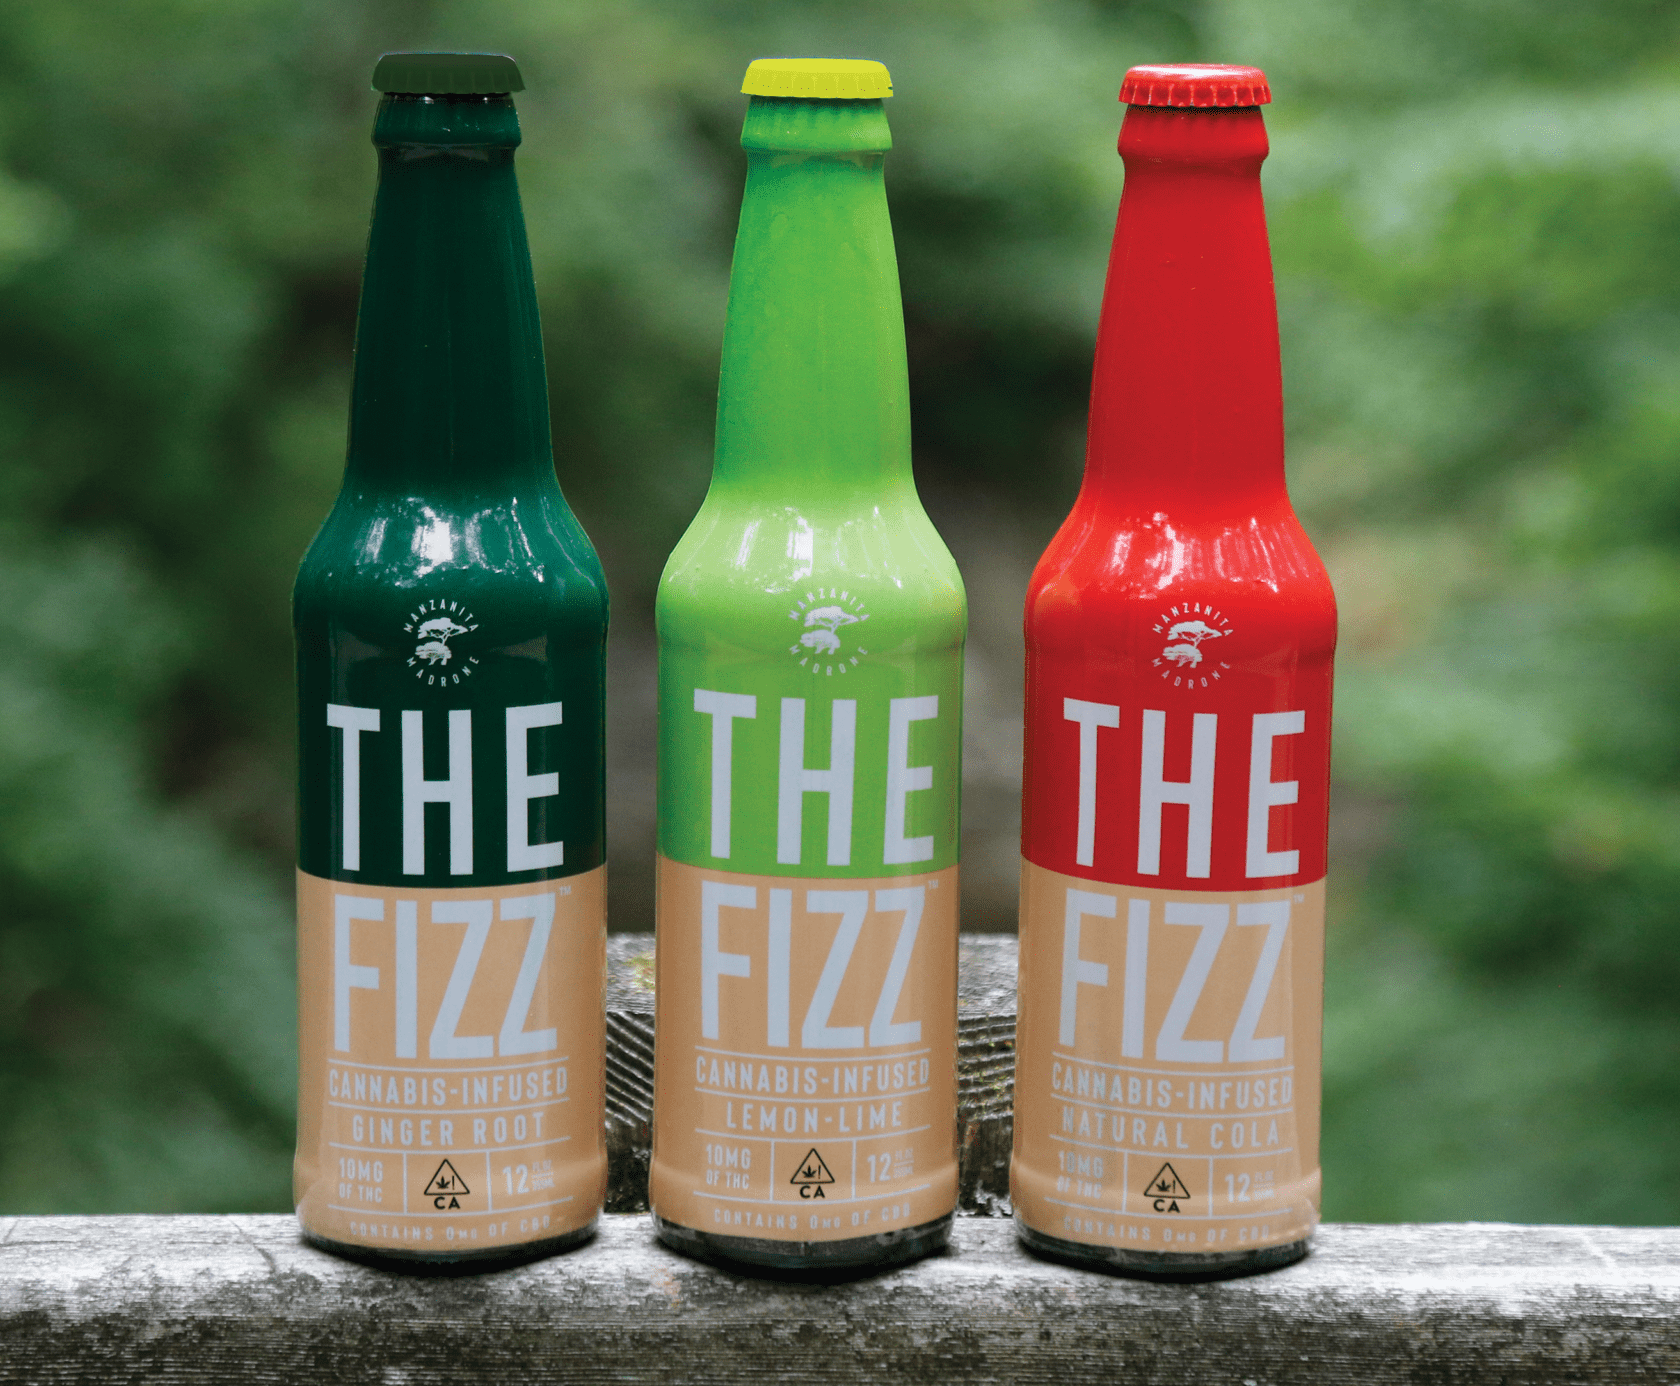 Three bottles on a ledge. Each on a different kind of a product called The Fizz, a cannabis infused beverage. Ginger Root, Lemon-Lime and Natural Cola flavor